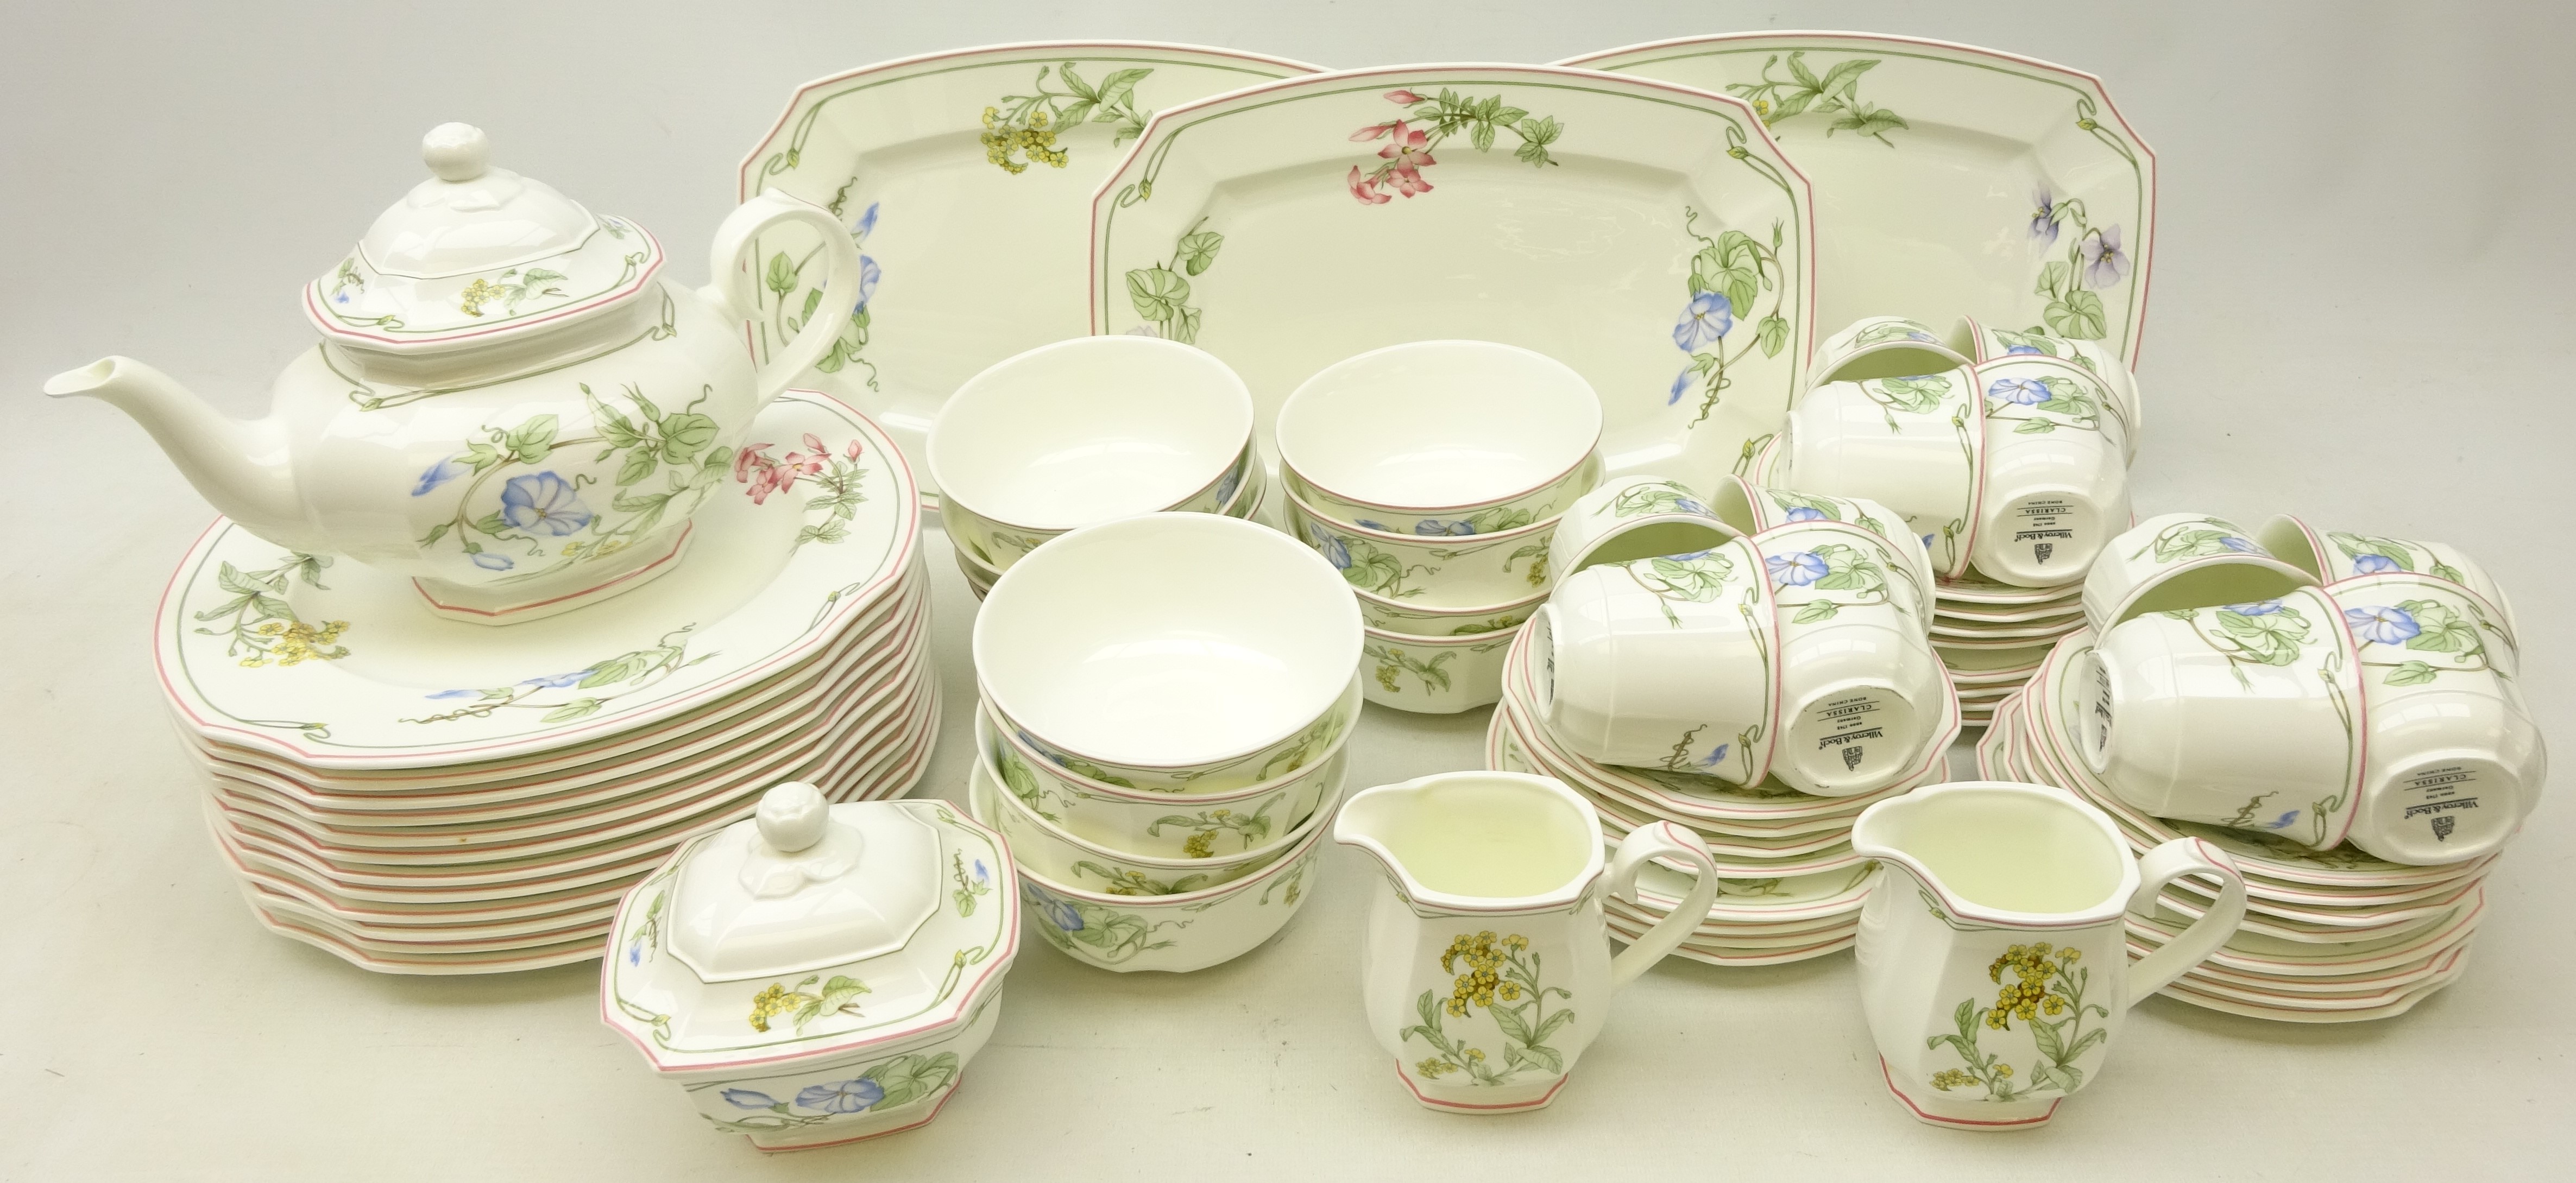 Villeroy and Boch Clarissa pattern dinner and tea service for twelve persons comprising dinner